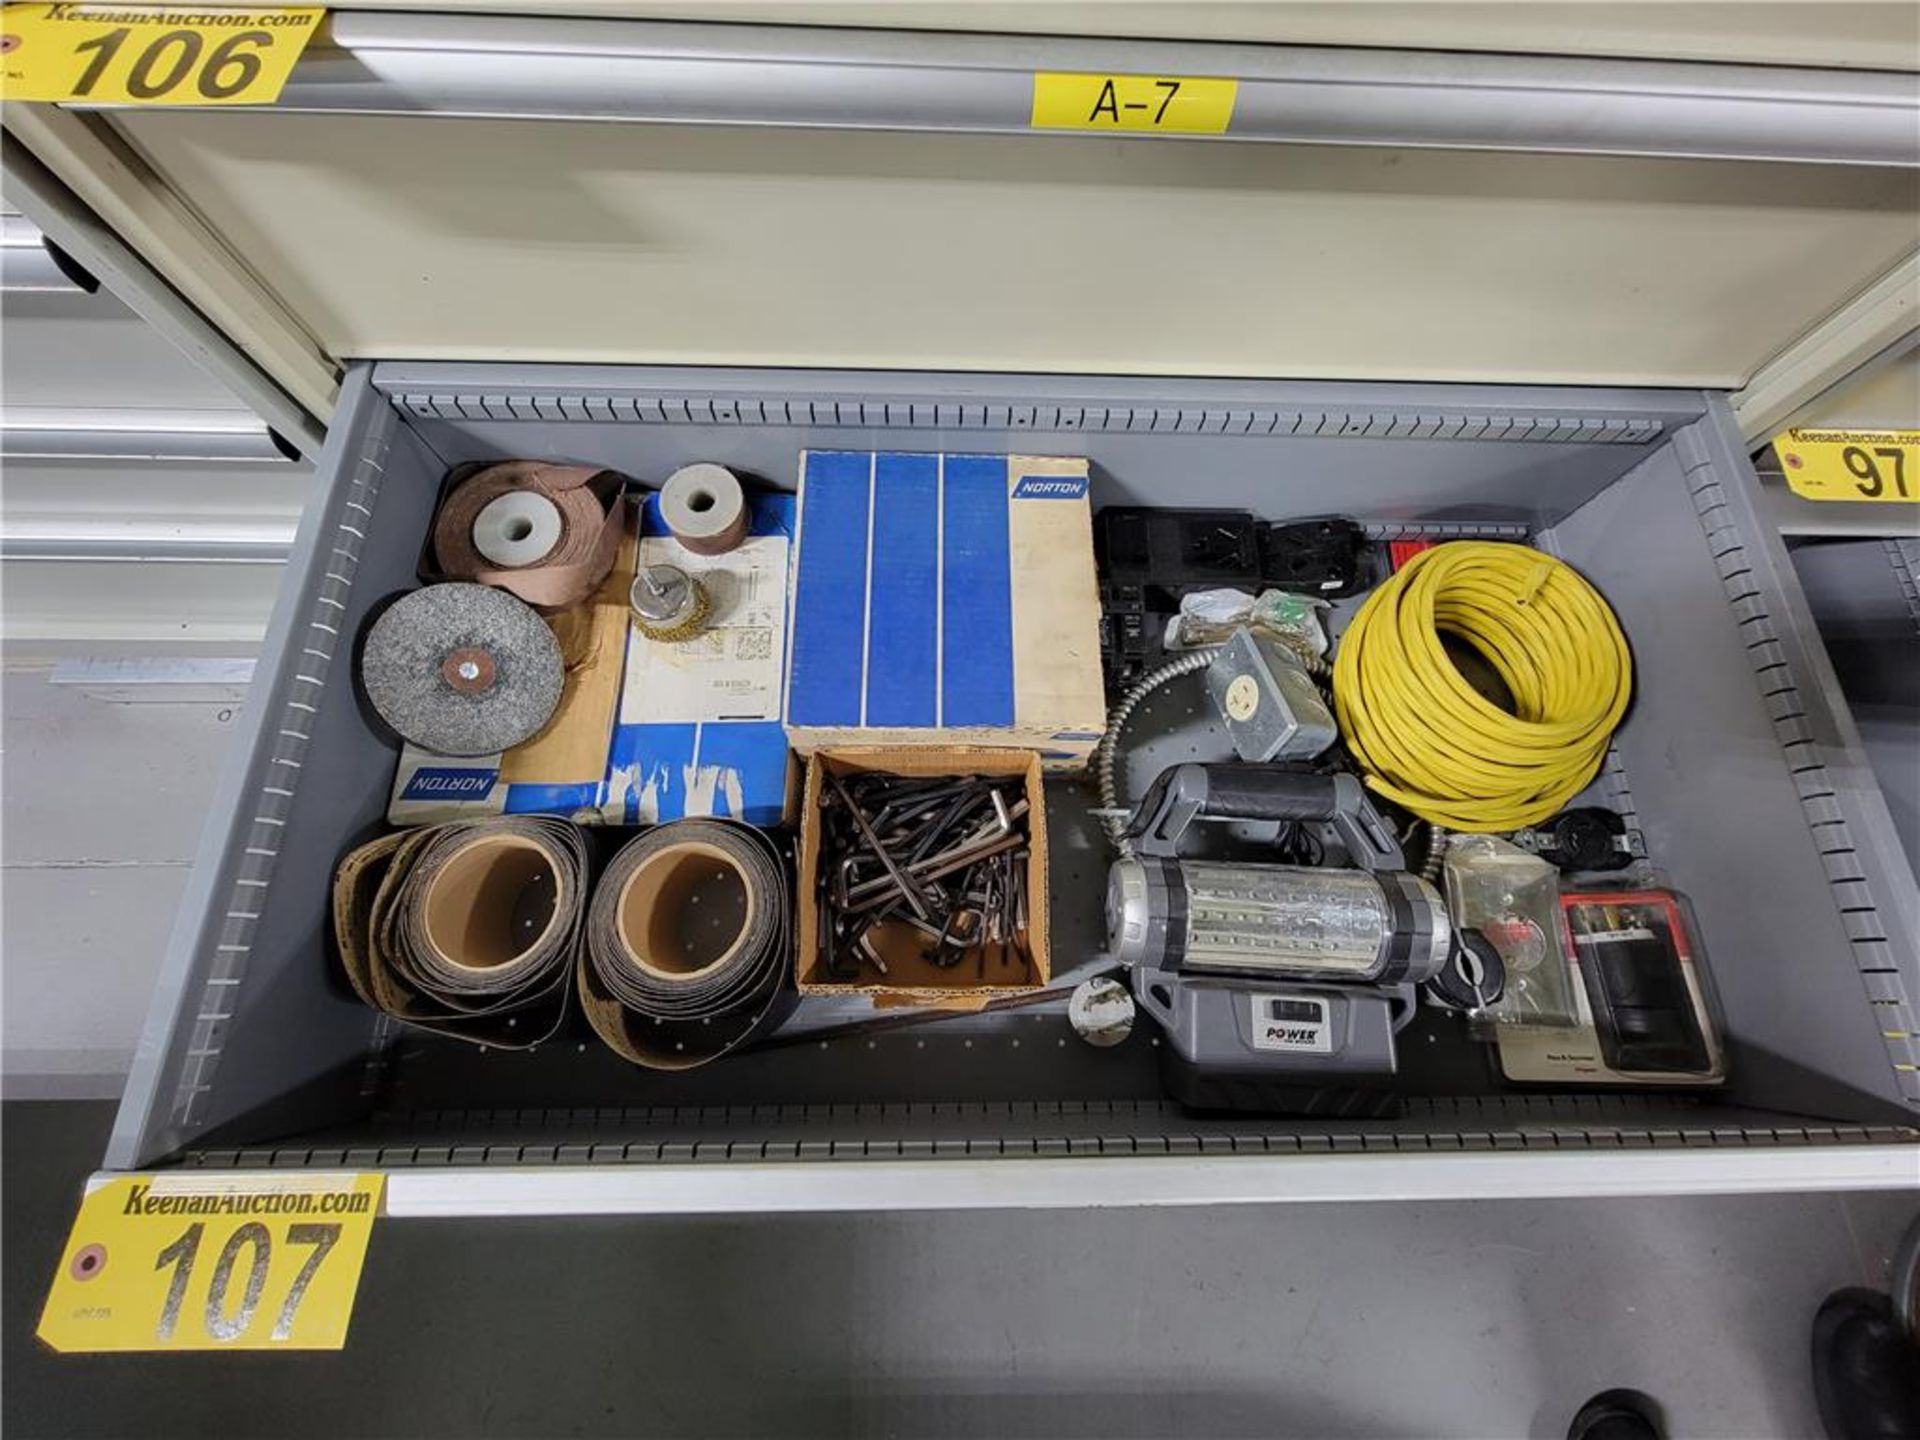 CONTENTS OF DRAWER: SANDING BELTS, DISC, LIGHTS, ELECTRICAL